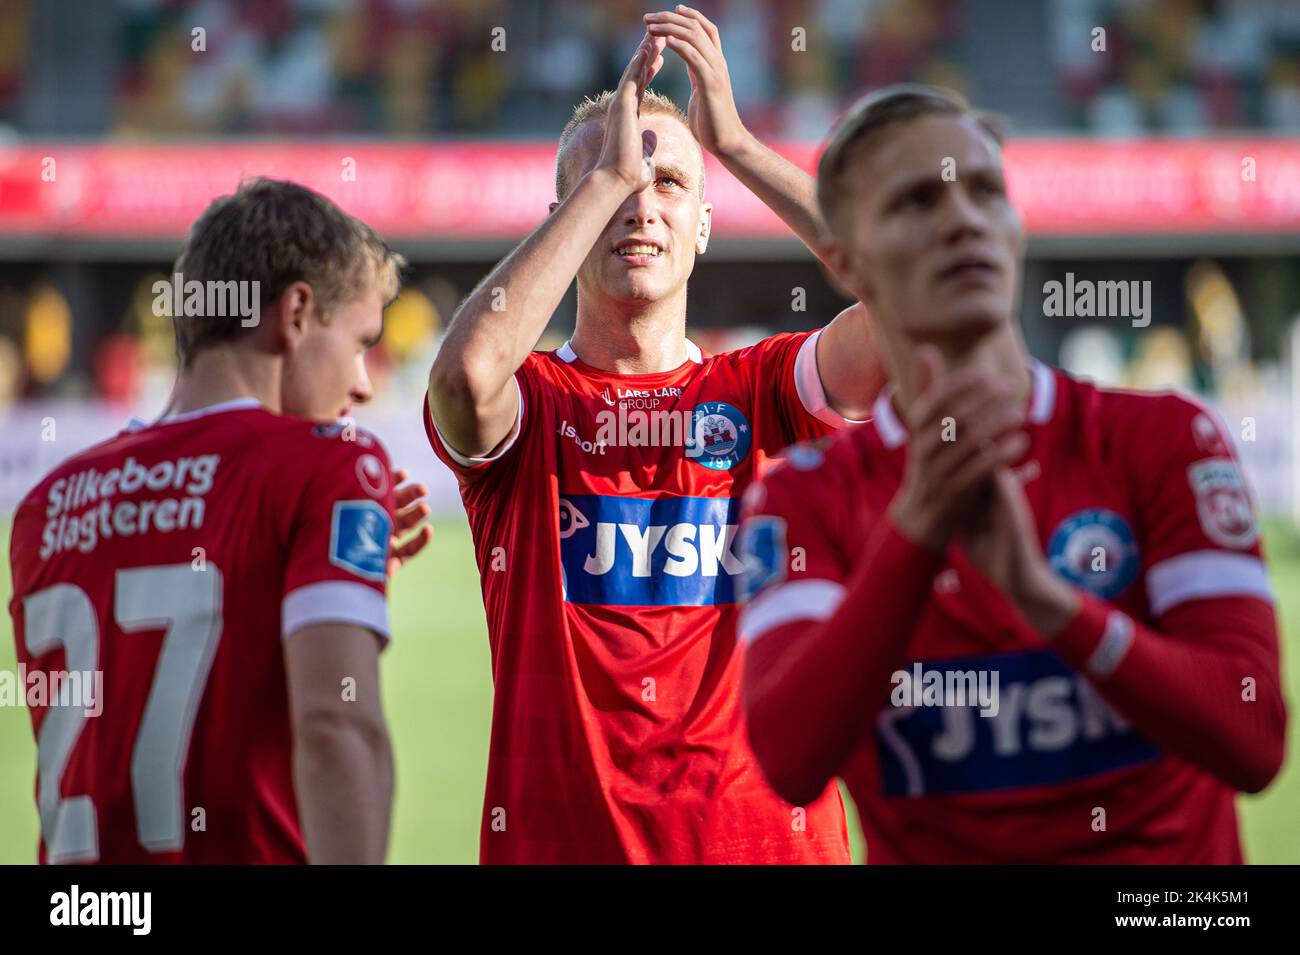 if vs horsens stock and images - Alamy